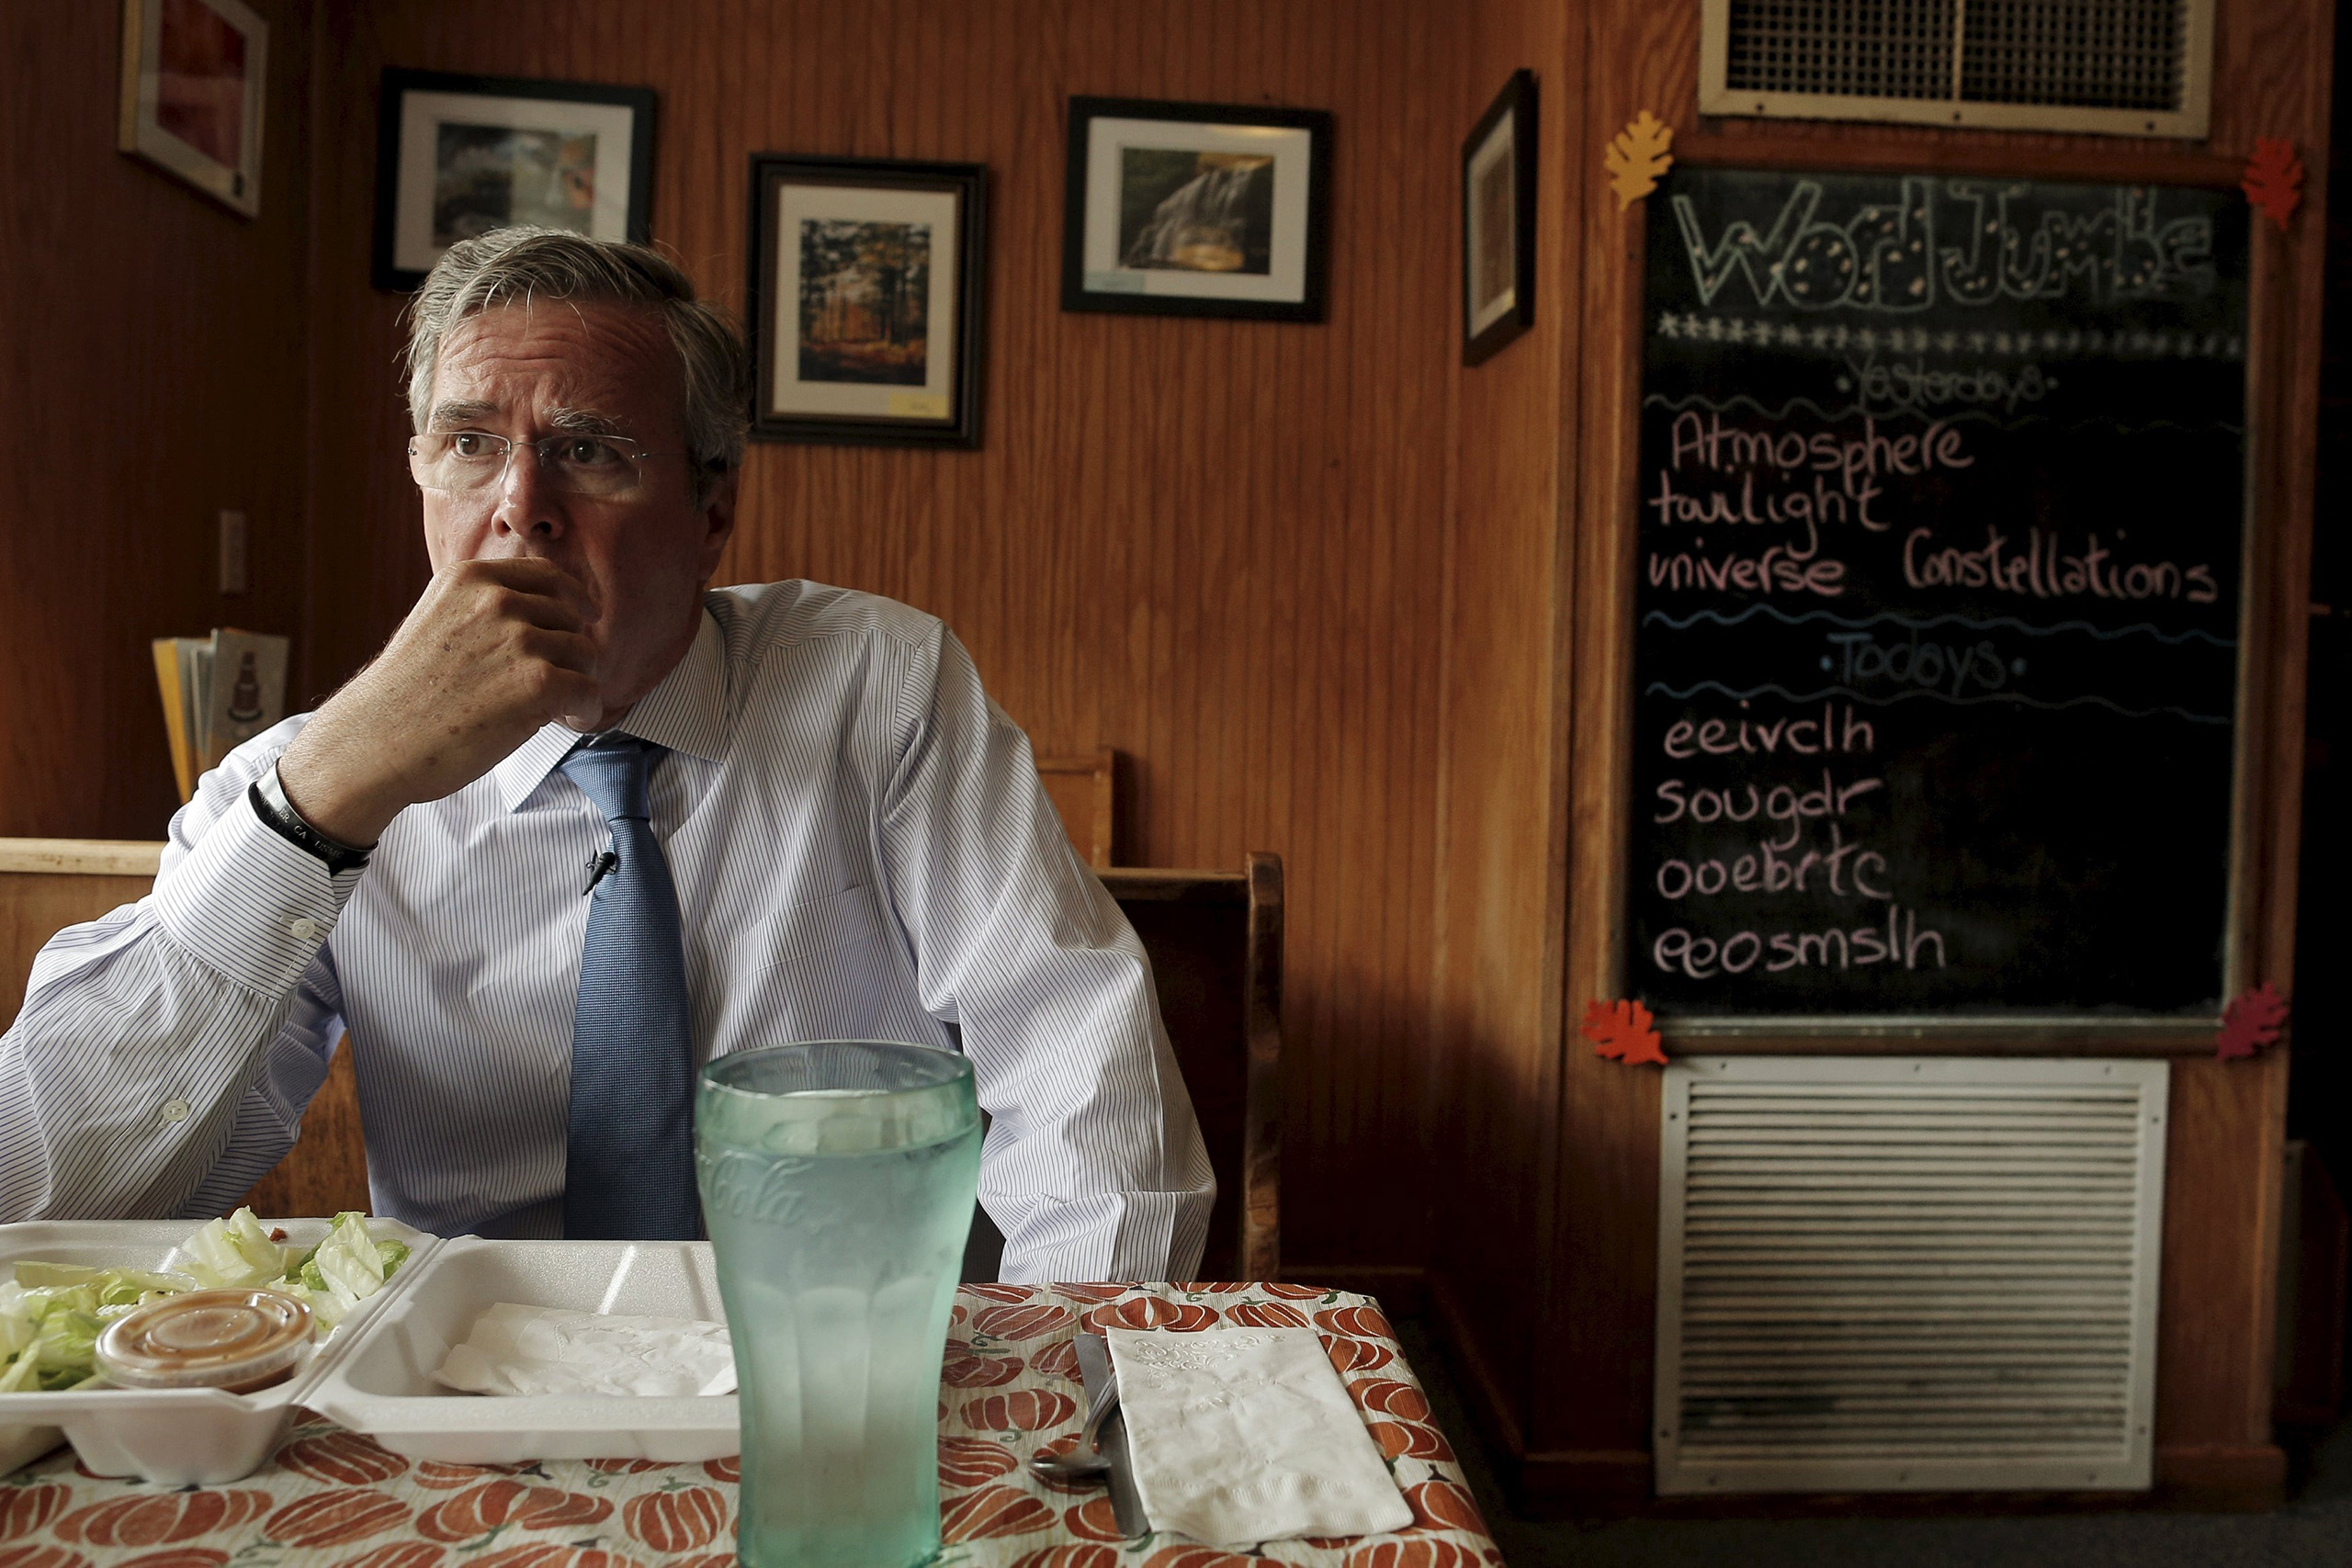 A onetime front runner, Bush campaigns 16-hour days, including a recent stop at a café in Peterborough, N.H. (Brian Snyder—Reuters)